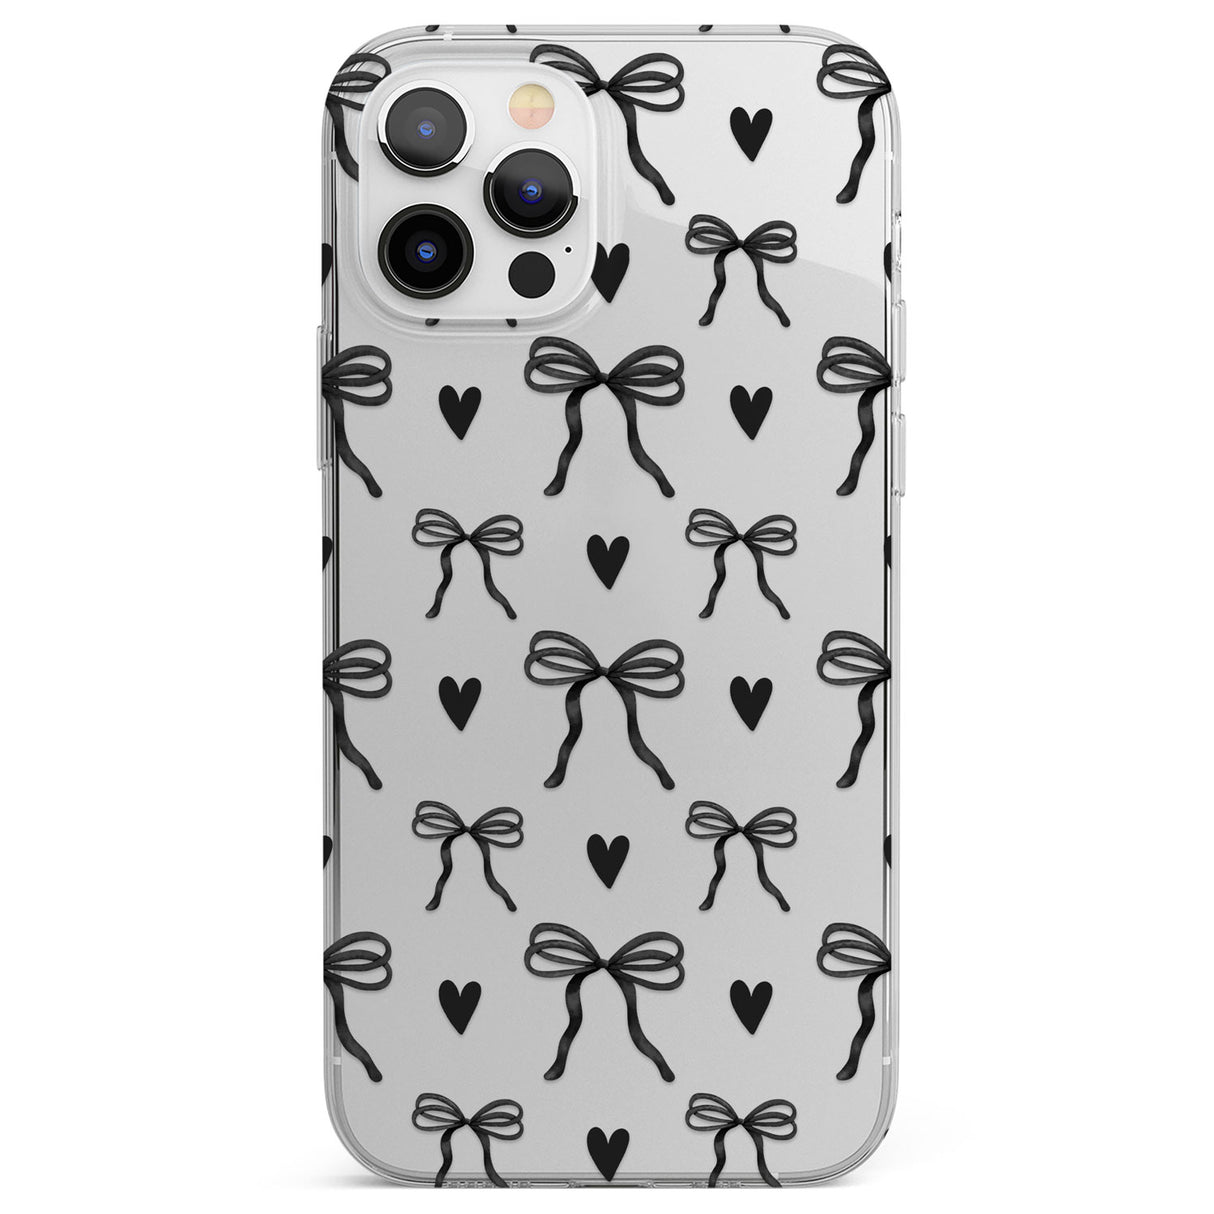 Black Bows & Hearts Phone Case for iPhone 12 Pro